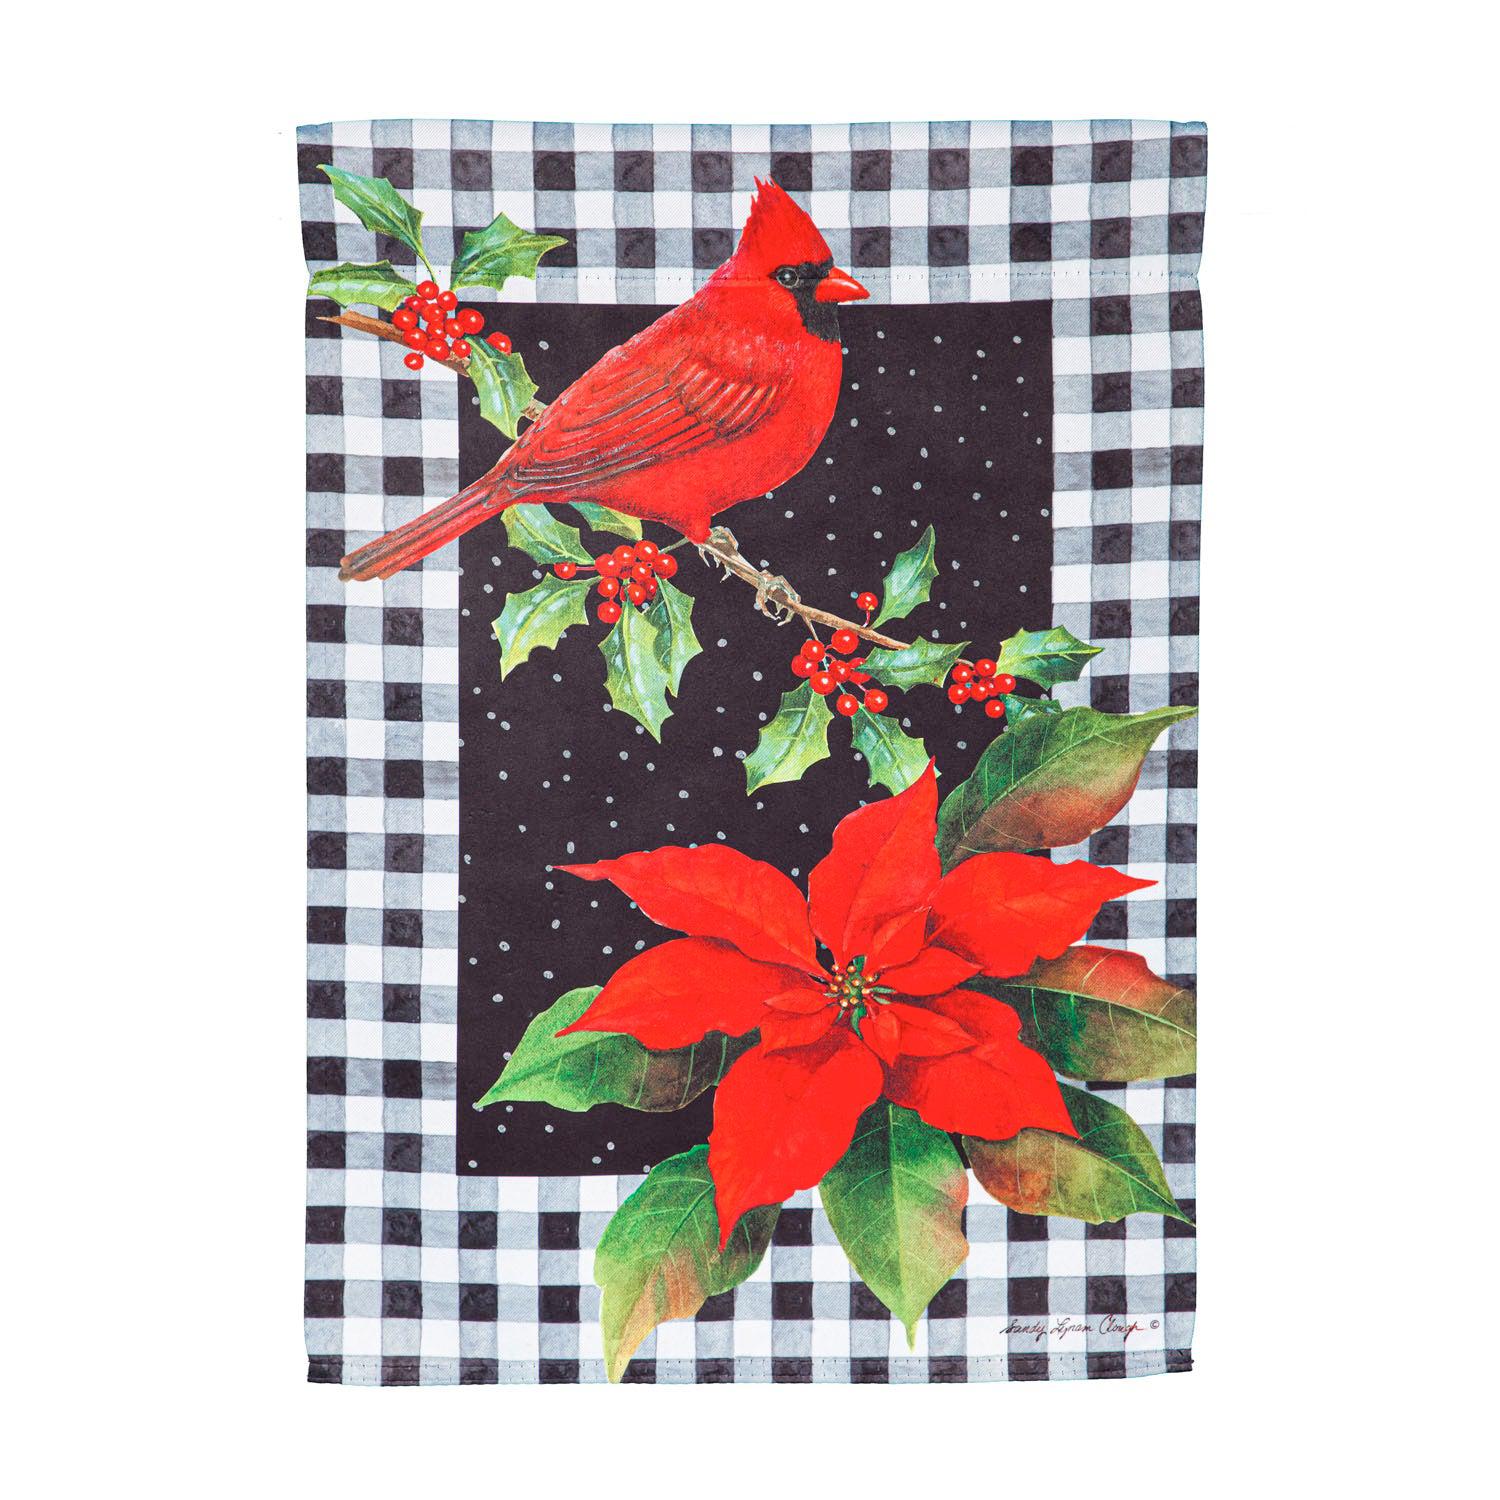 The Cardinal & Holly garden flag features a bright red cardinal sitting on a holly branch with a poinsettia in the lower corner and a black & white checked background